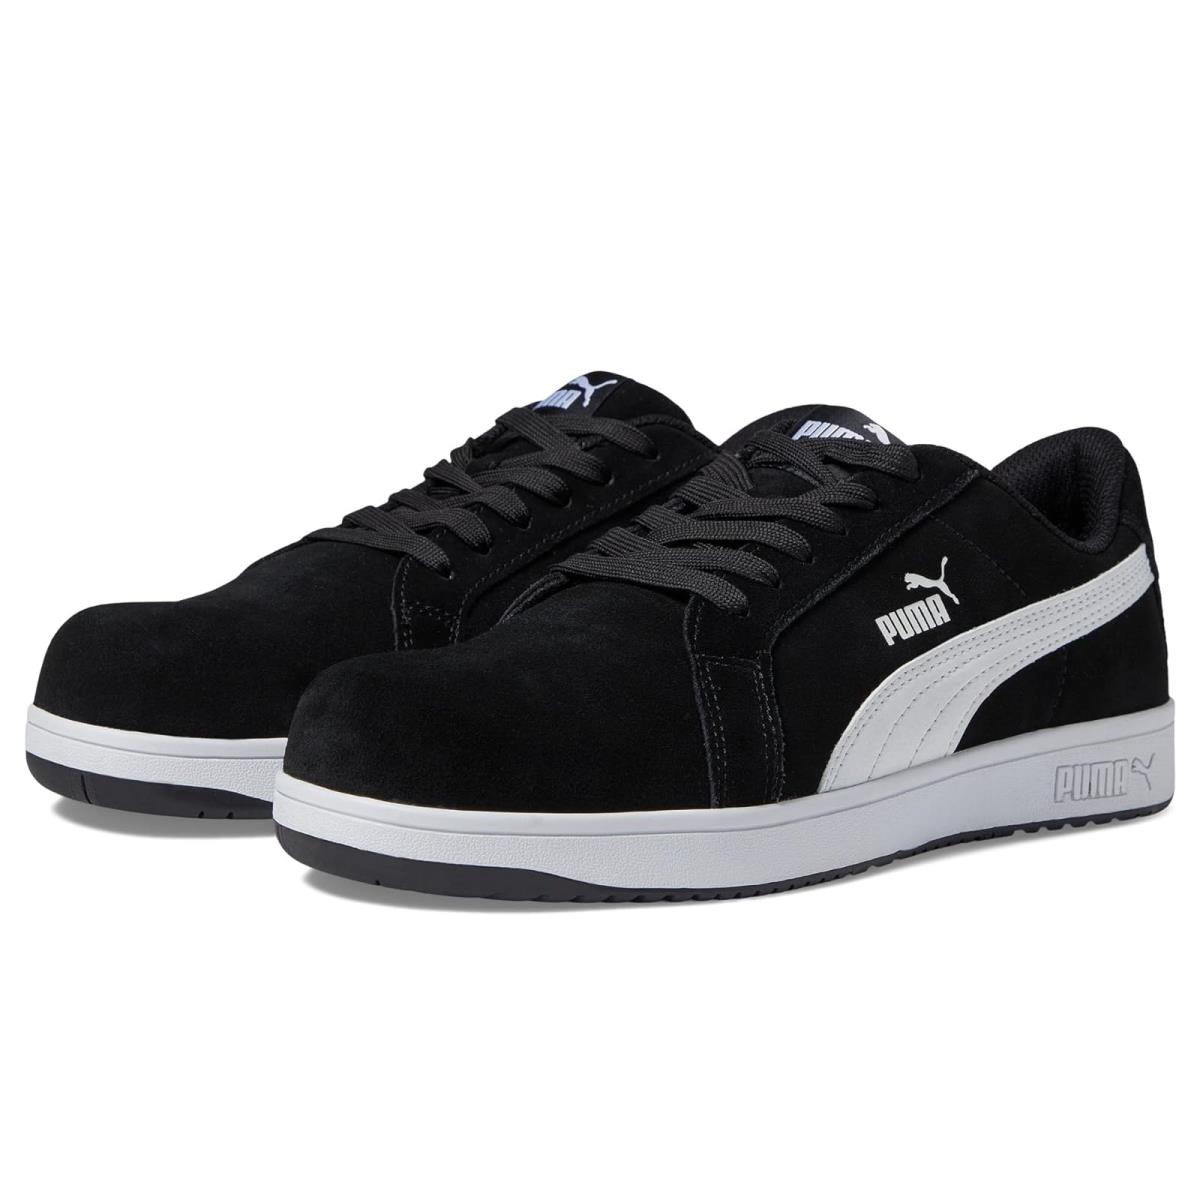 Man`s Sneakers Athletic Shoes Puma Safety Iconic Suede Low Astm EH Black/White